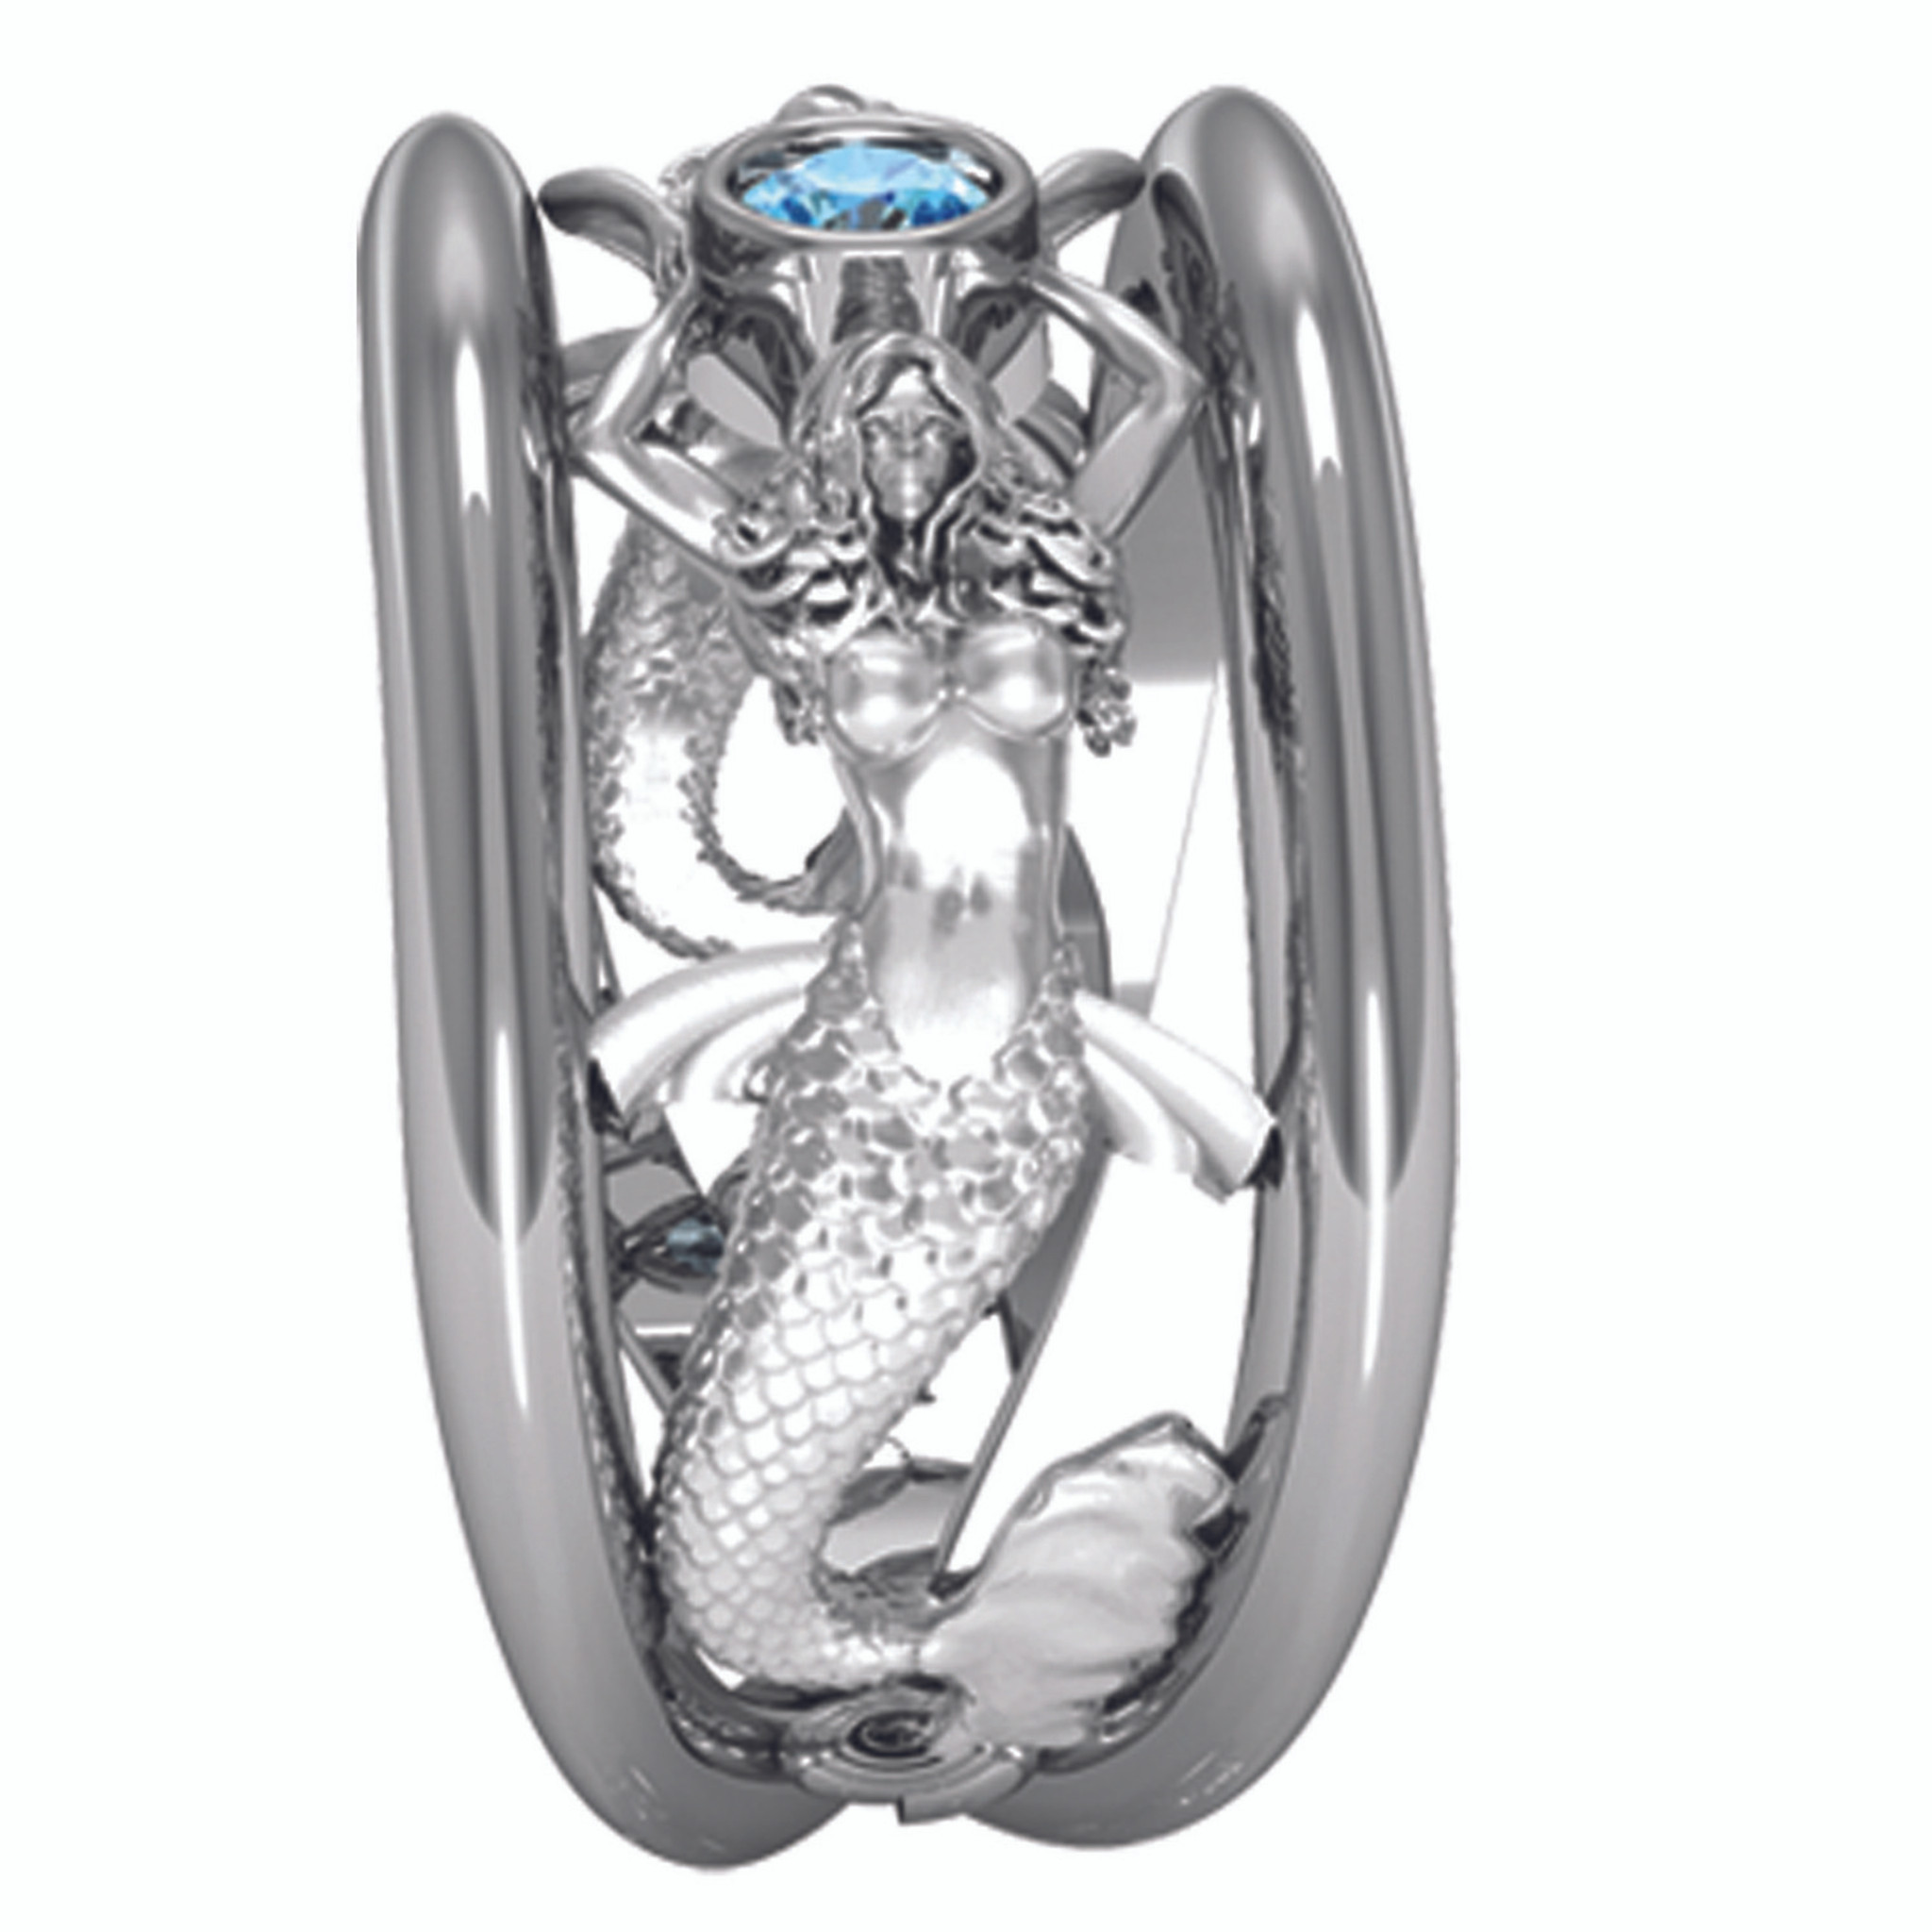  Lzz Sea Goddess Mermaid 925 Sterling Silver Ring Fashion  Two-Color Mermaid Ring Inlaid Blue Cubic Zirconia Female Ring Size 6-10 (US Code  10)